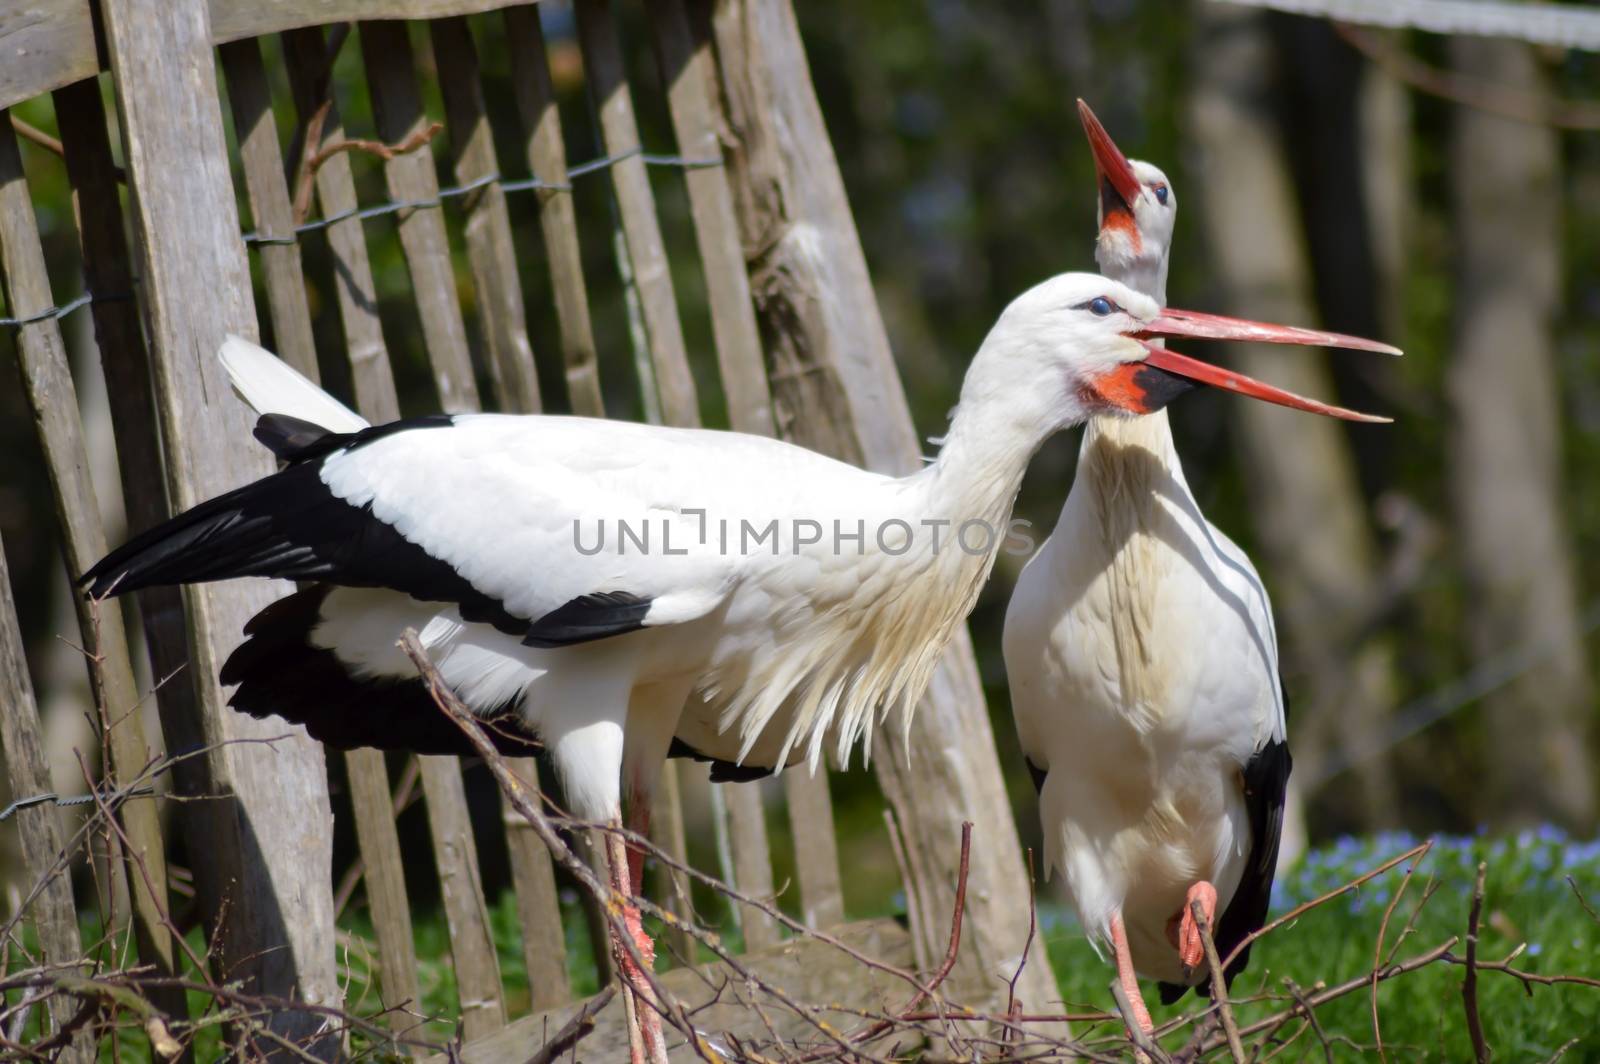 Two storks in a wood by Philou1000